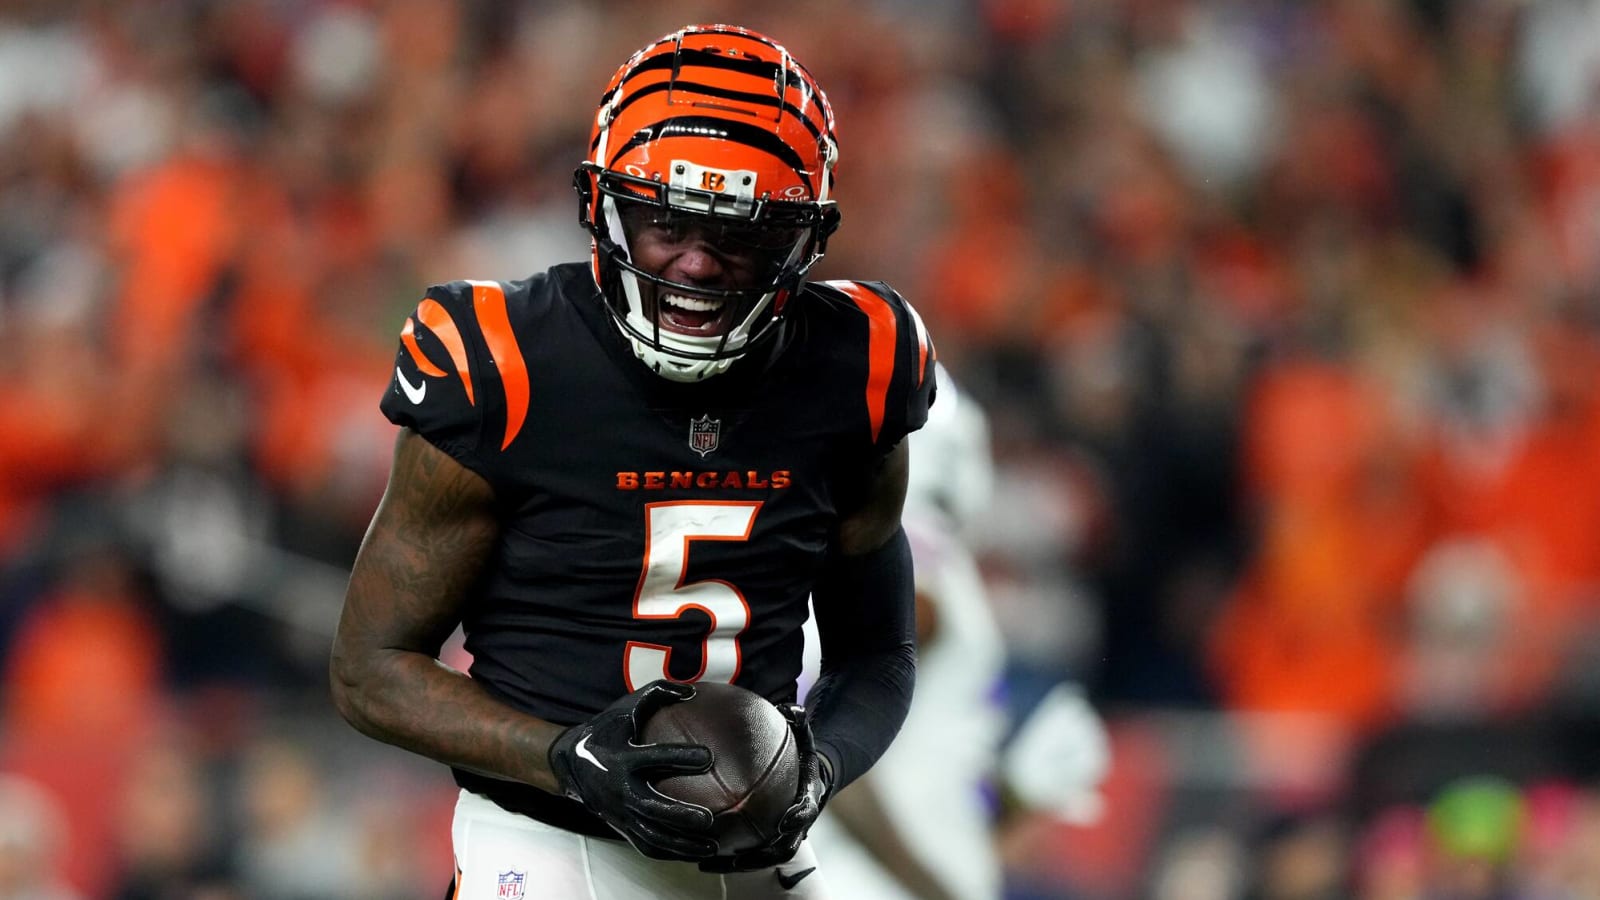 Bengals’ Executive Speaks On Contract Talks For Key Playmakers